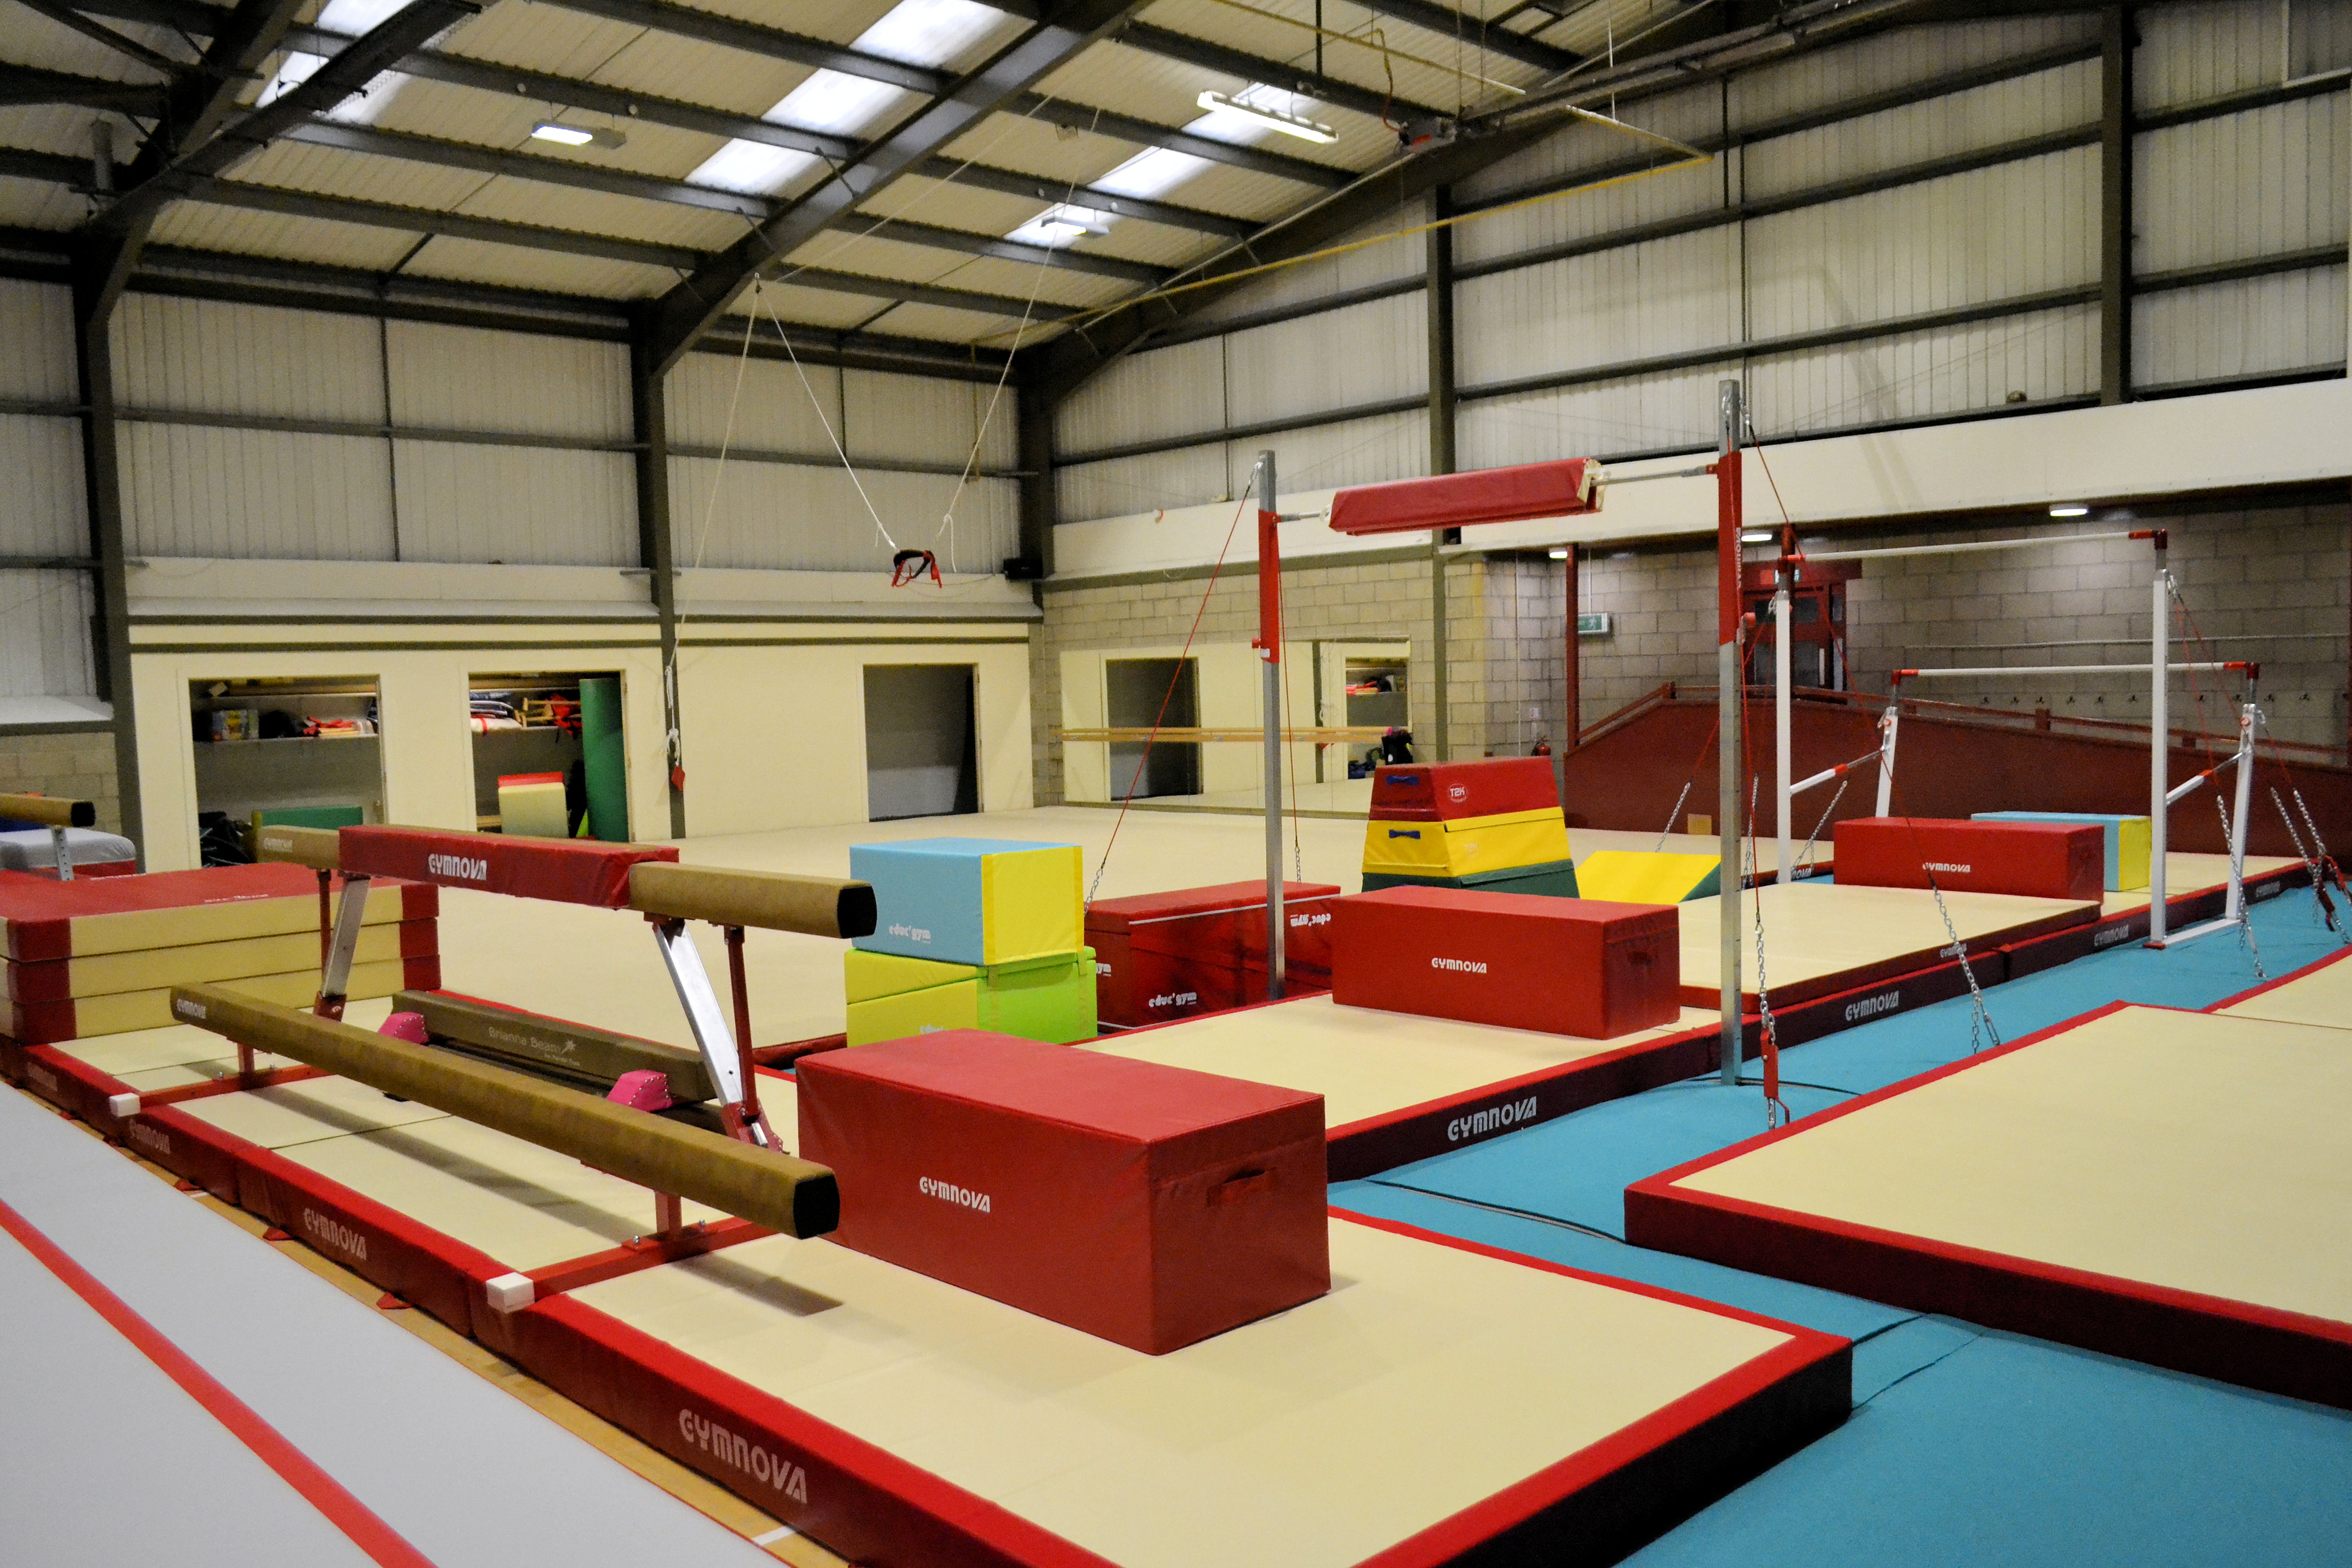 image of Gymnastics hall with equipment out